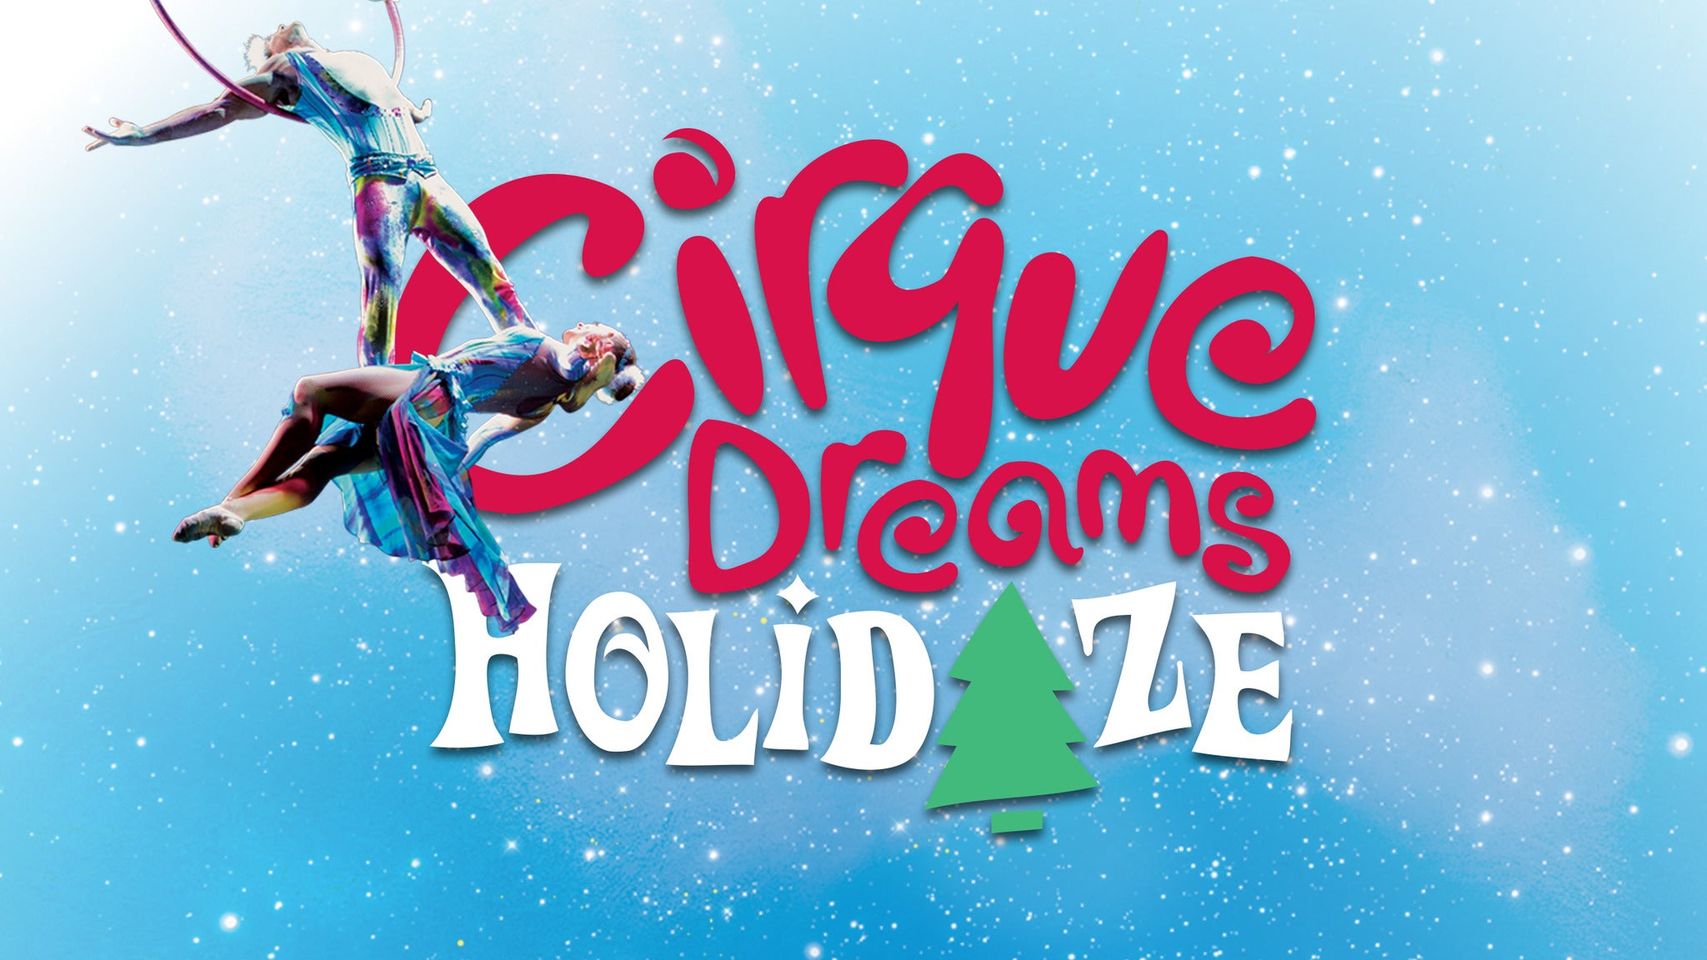 Cirque Dreams Holidaze at Oakdale Theater